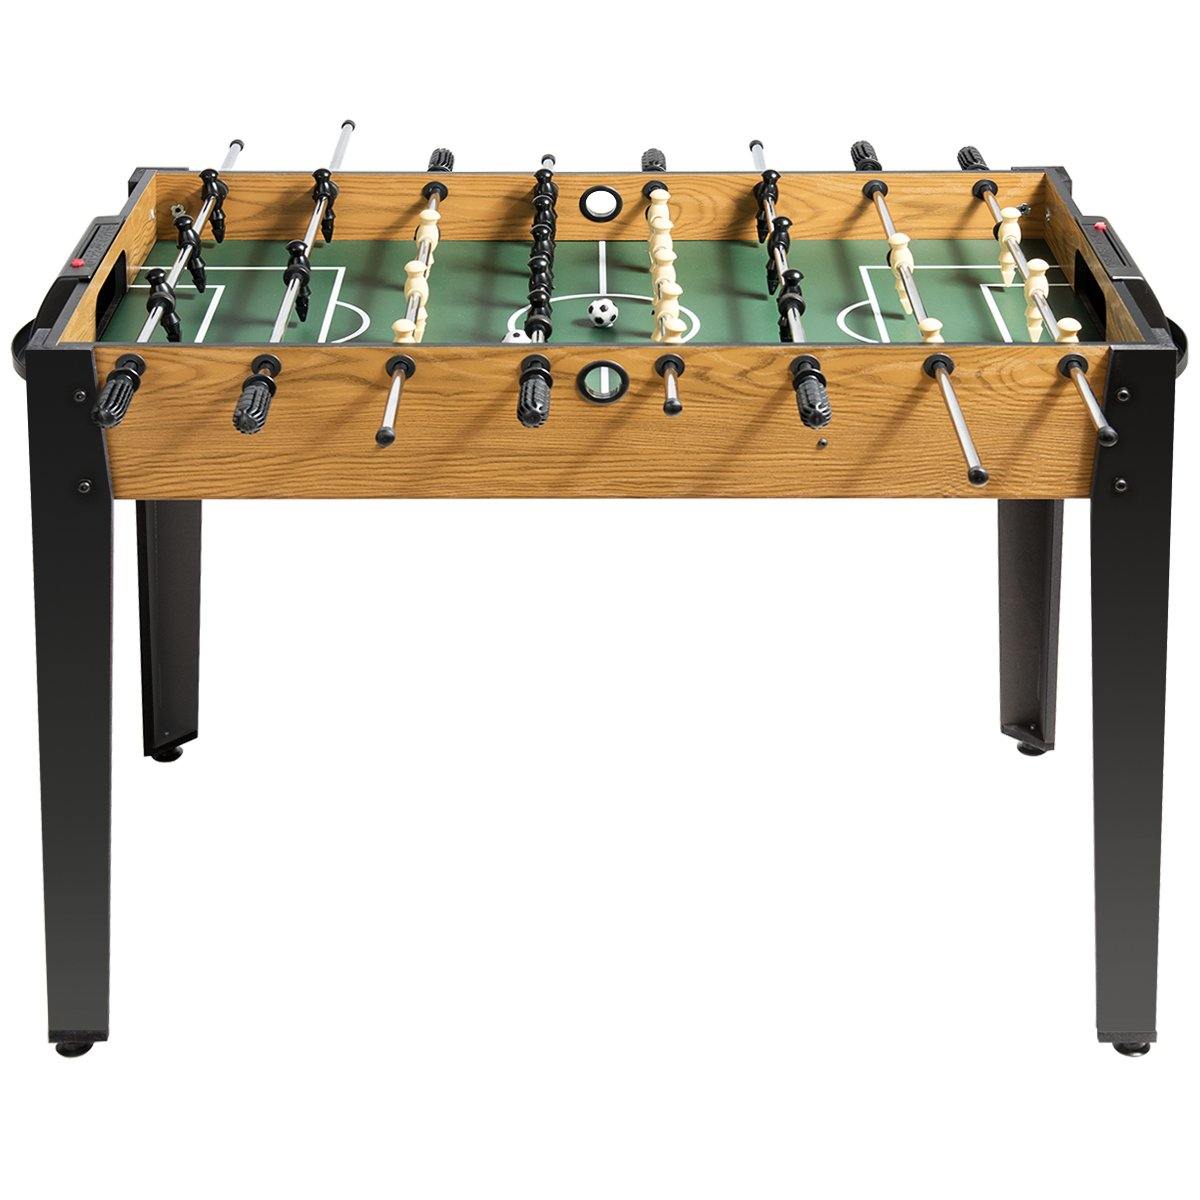 Giantex Foosball Table Suit for 4 Players Arcades Football Table for Game Room Adults Competition Size Table Football for Kids Wooden Soccer Table Game w/Footballs 